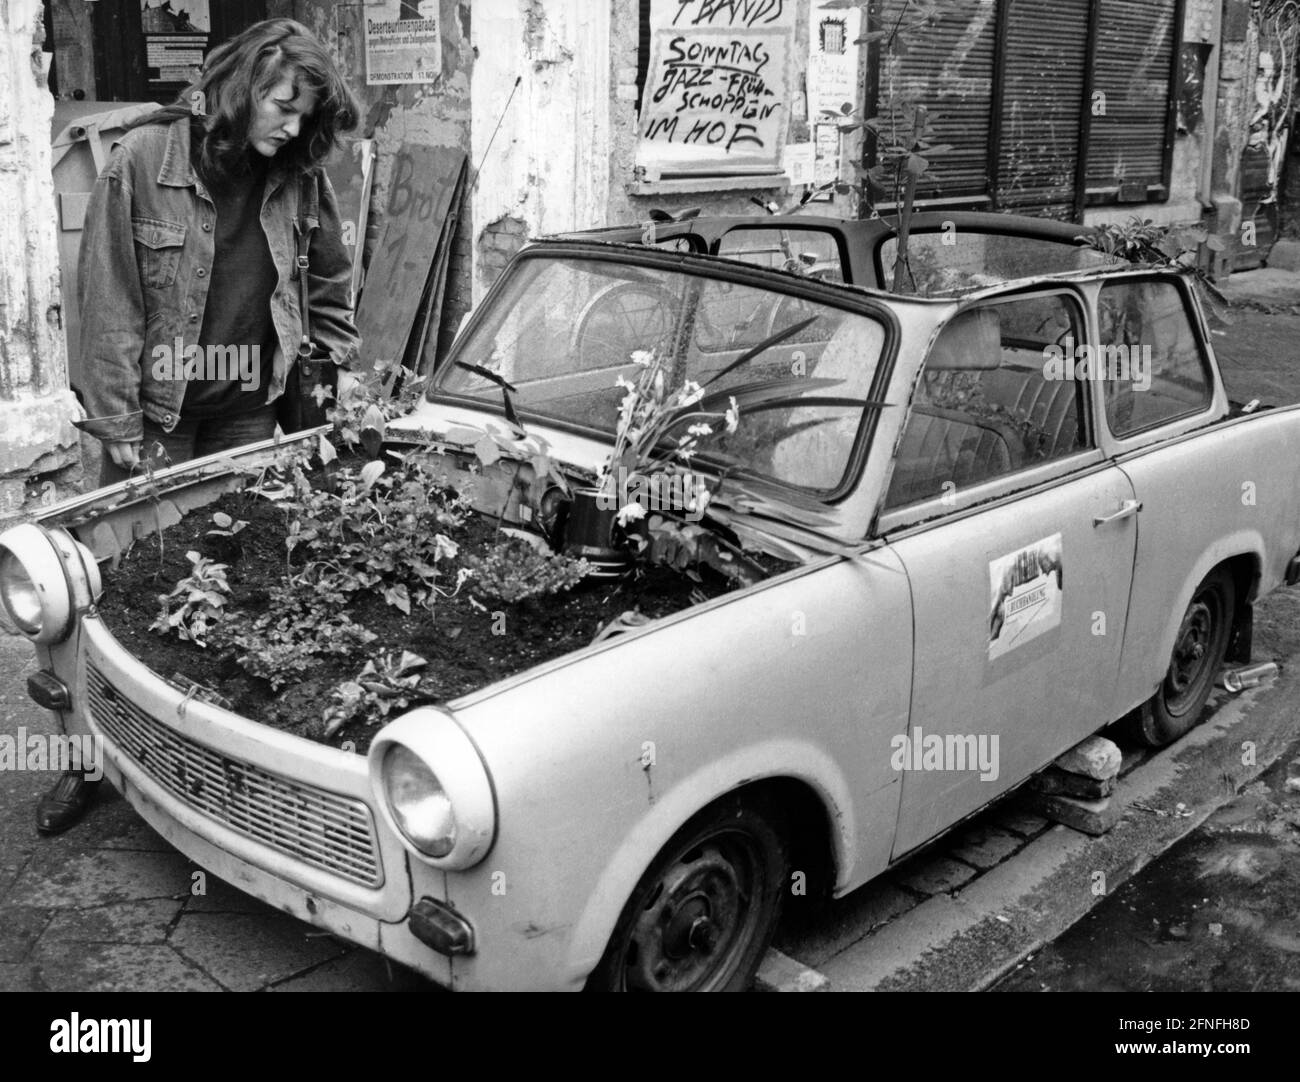 A Trabant 601 left at the side of the road is reused as a flower bed in Tucholskystraße in Berlin-Mitte. After the fall of the Wall, many GDR-produced vehicles were simply abandoned by their owners. [automated translation] Stock Photo